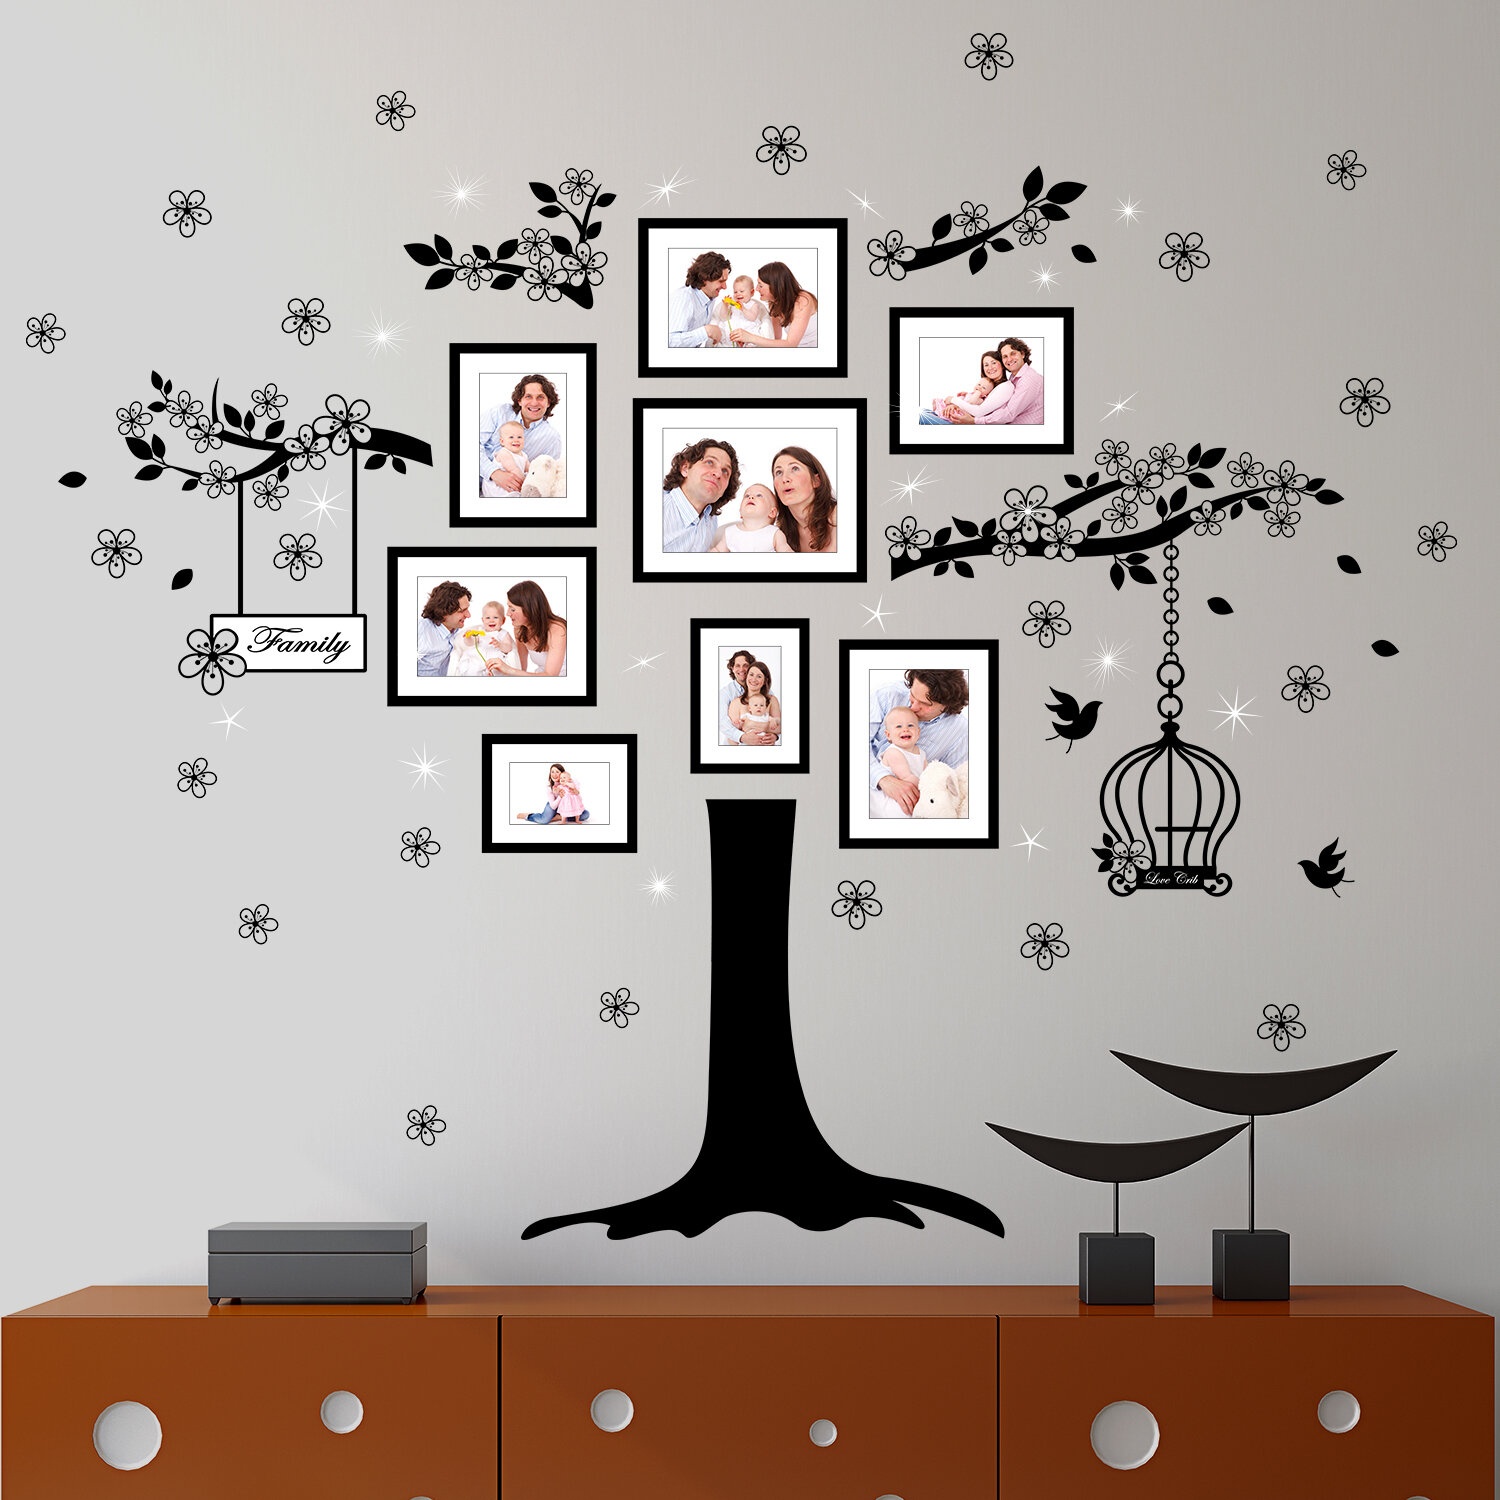 Inspired Wall LV Decal Stickers Wall Art stickers Home Decor